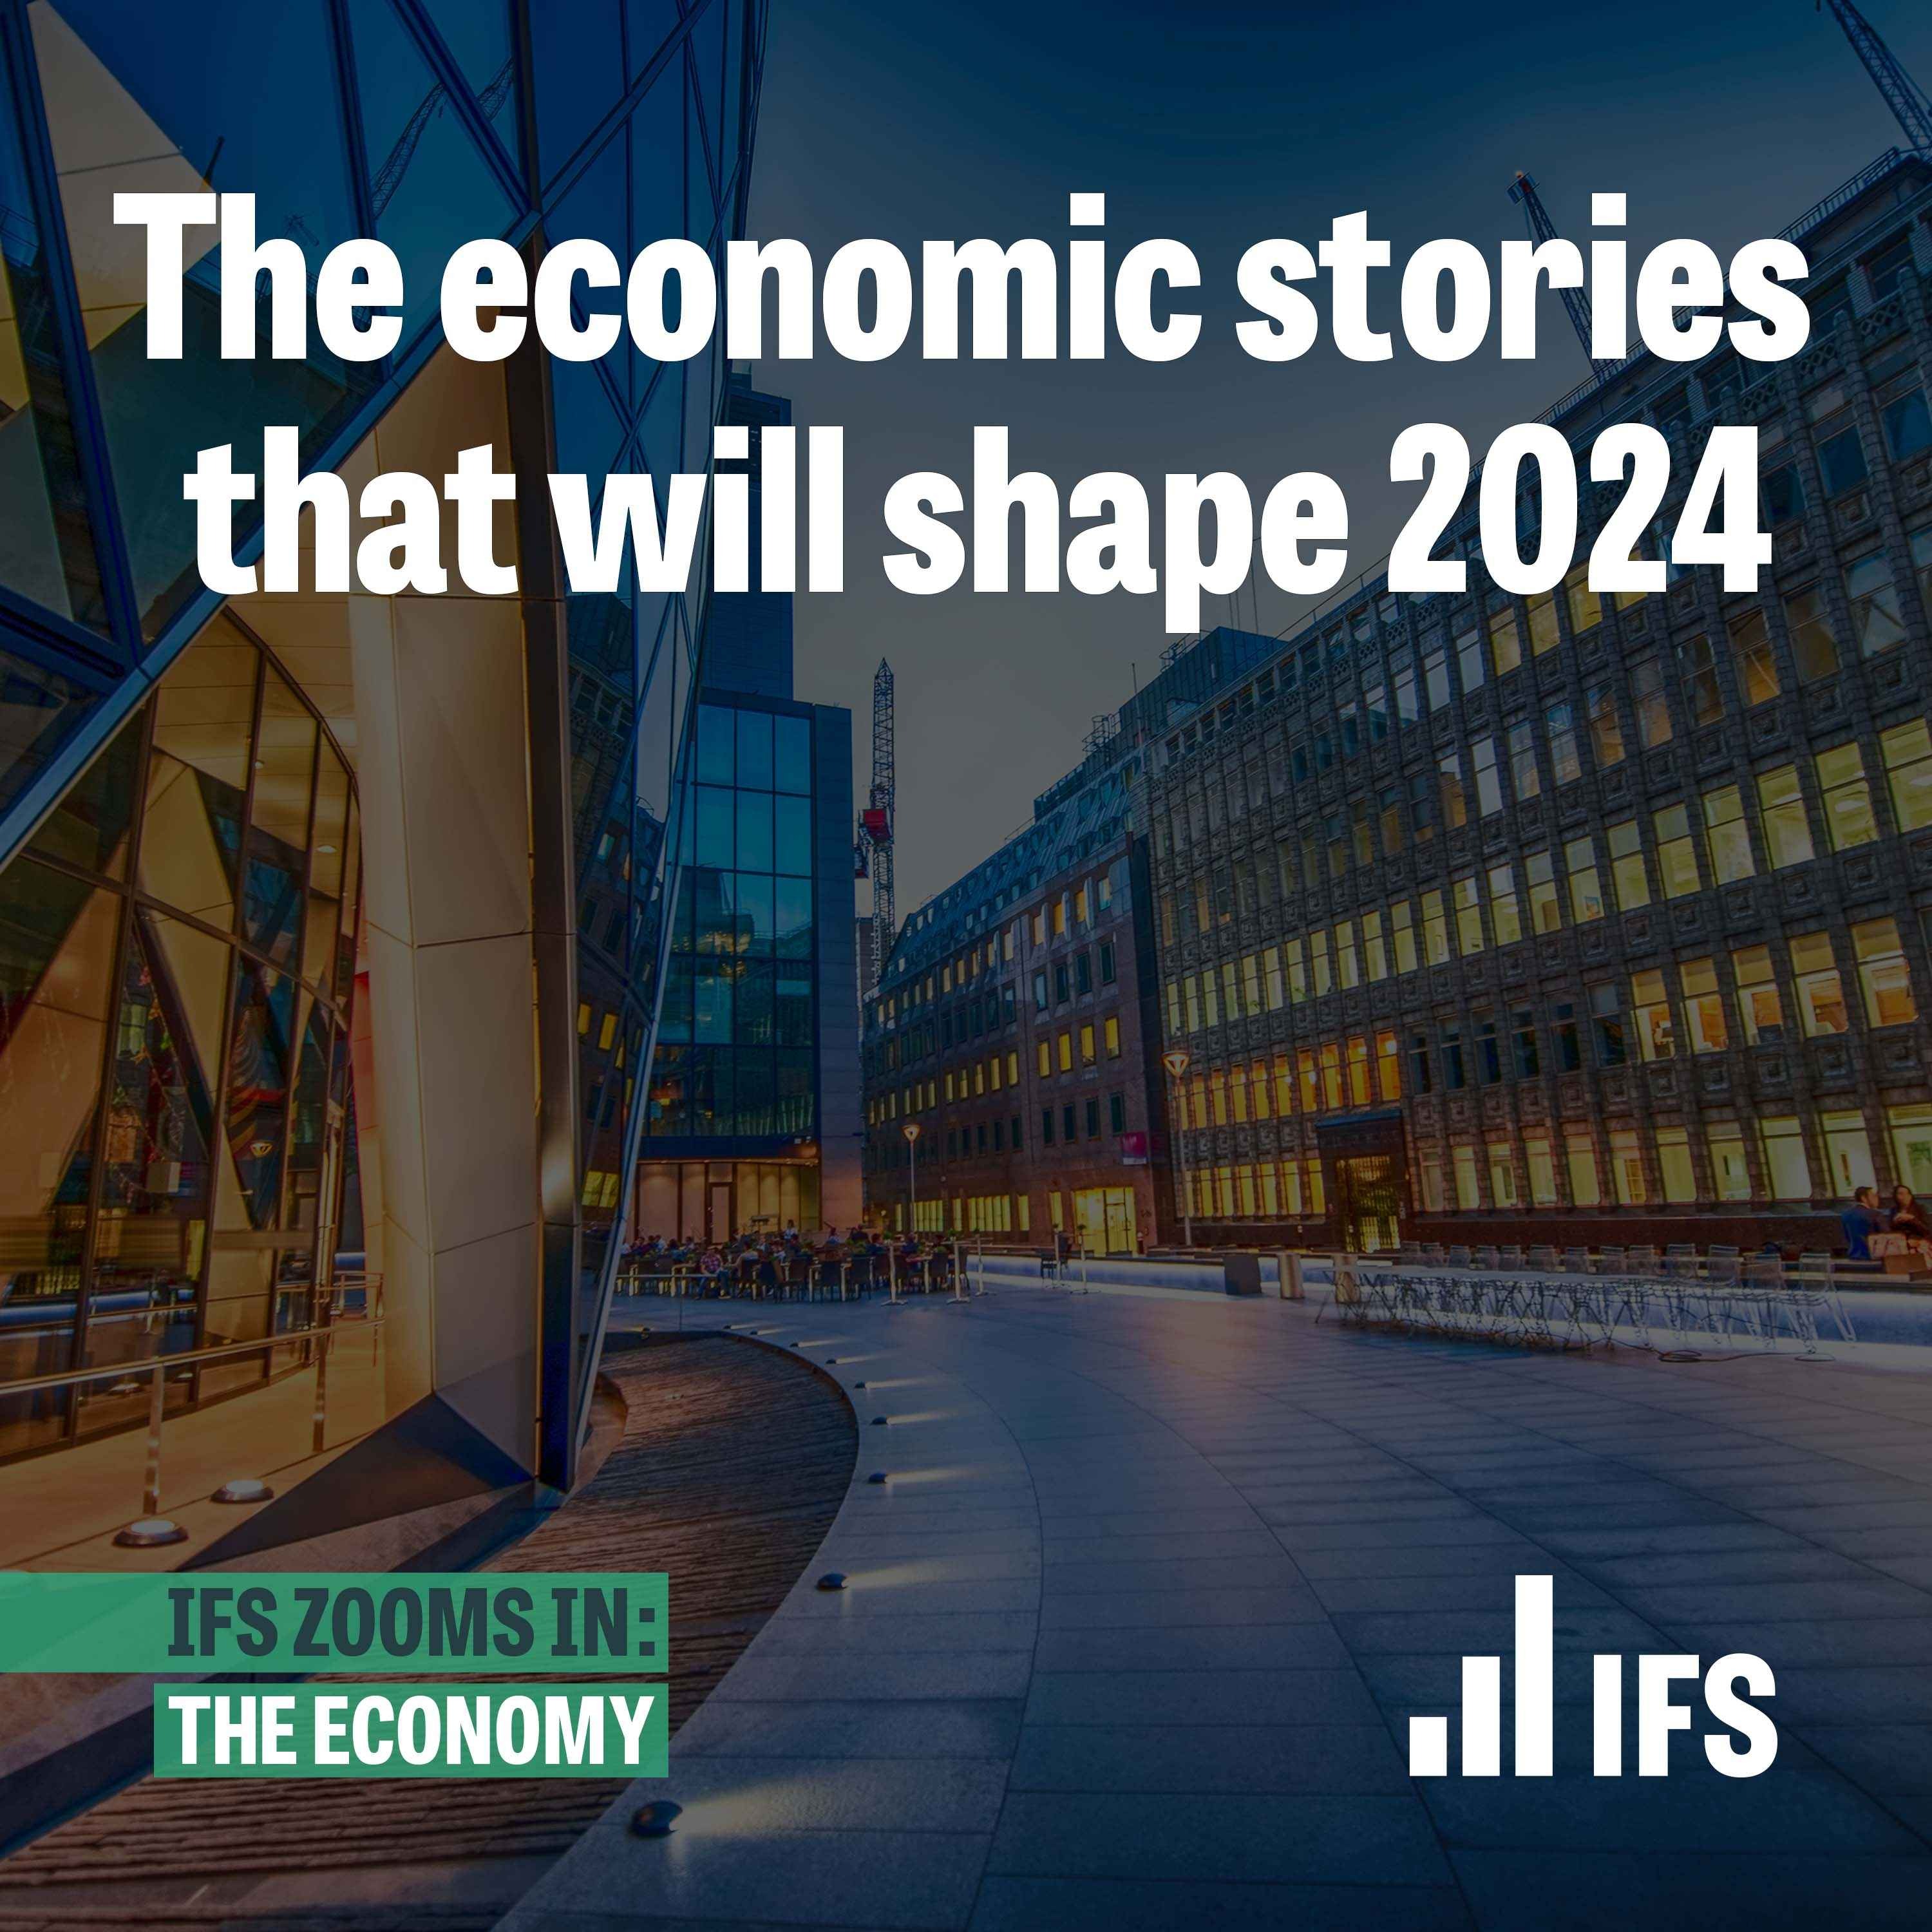 The economic stories that will shape 2024